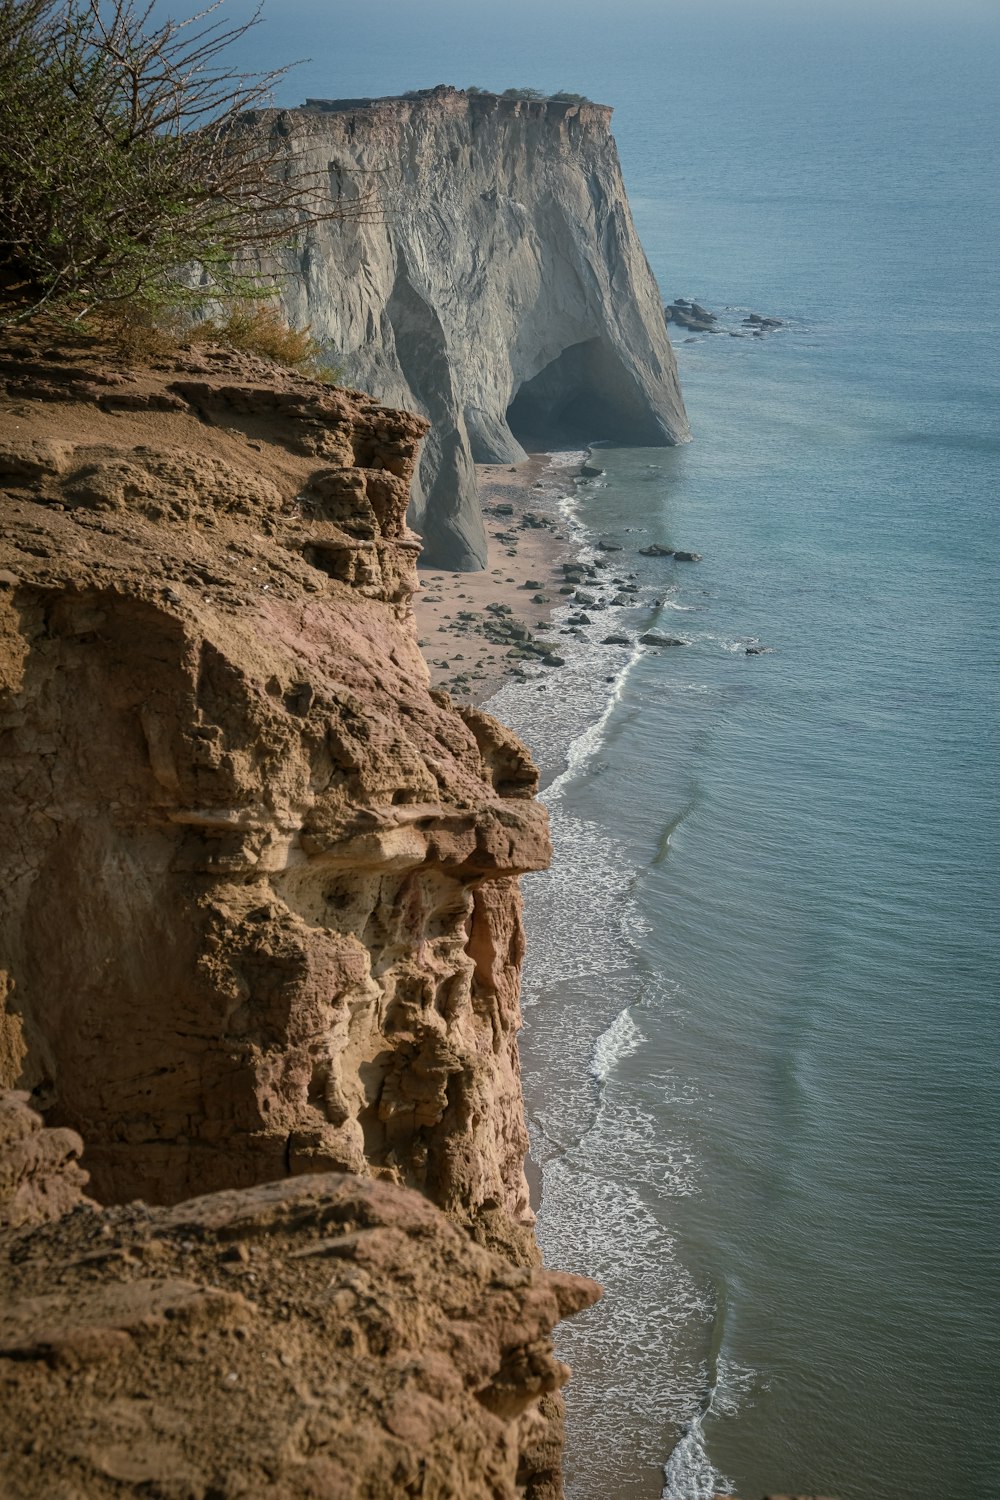 a rocky cliff overlooks the ocean and beach